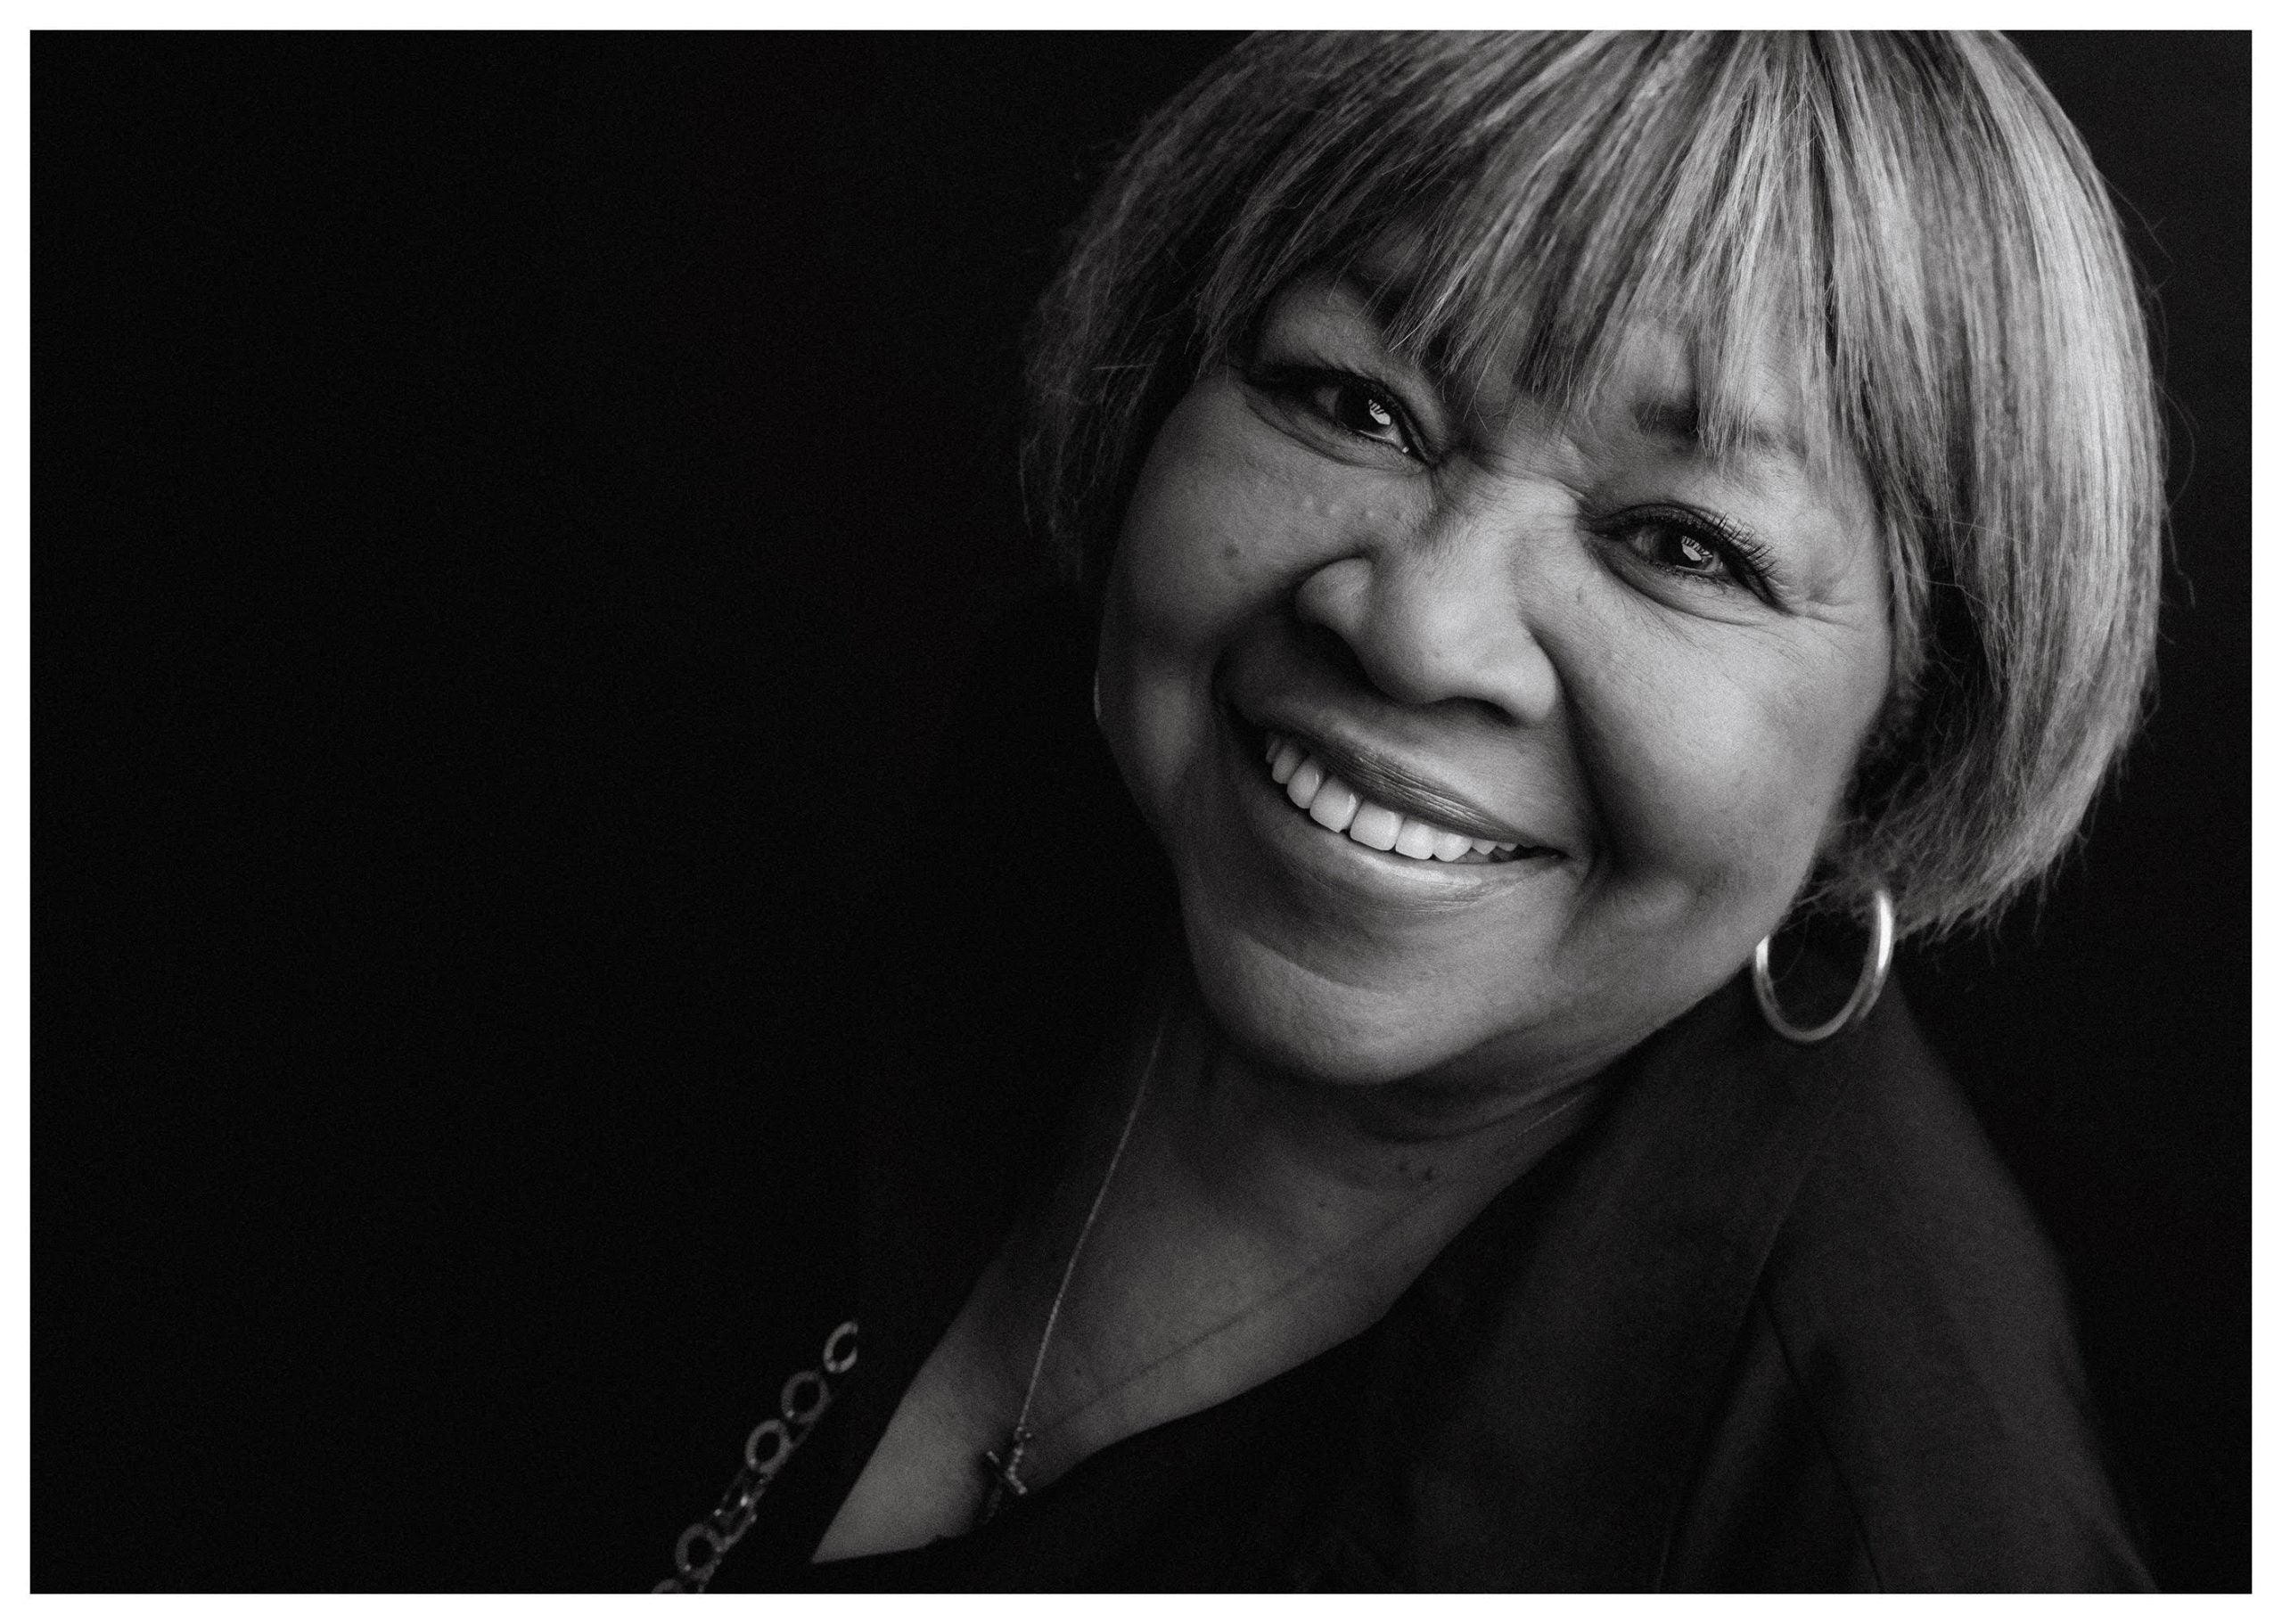 Why Mavis Staples Says 'It Was Time' To Do A Children's Book With 'Bridges Instead Of Walls'